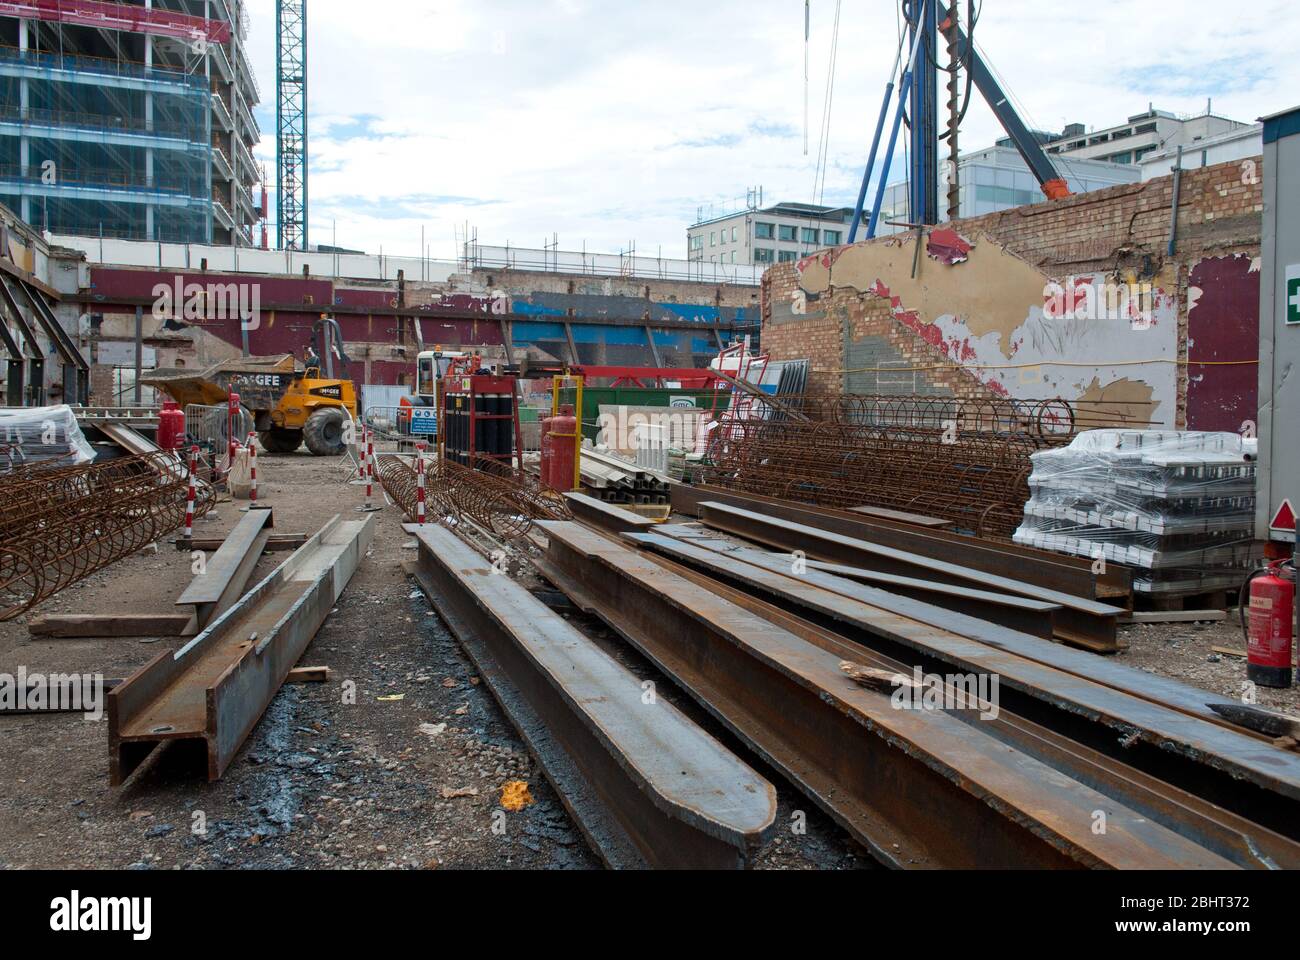 Construction site on the site of the Former Hammersmith Palais, 242 Shepherds Bush Road, London, W6 Stock Photo